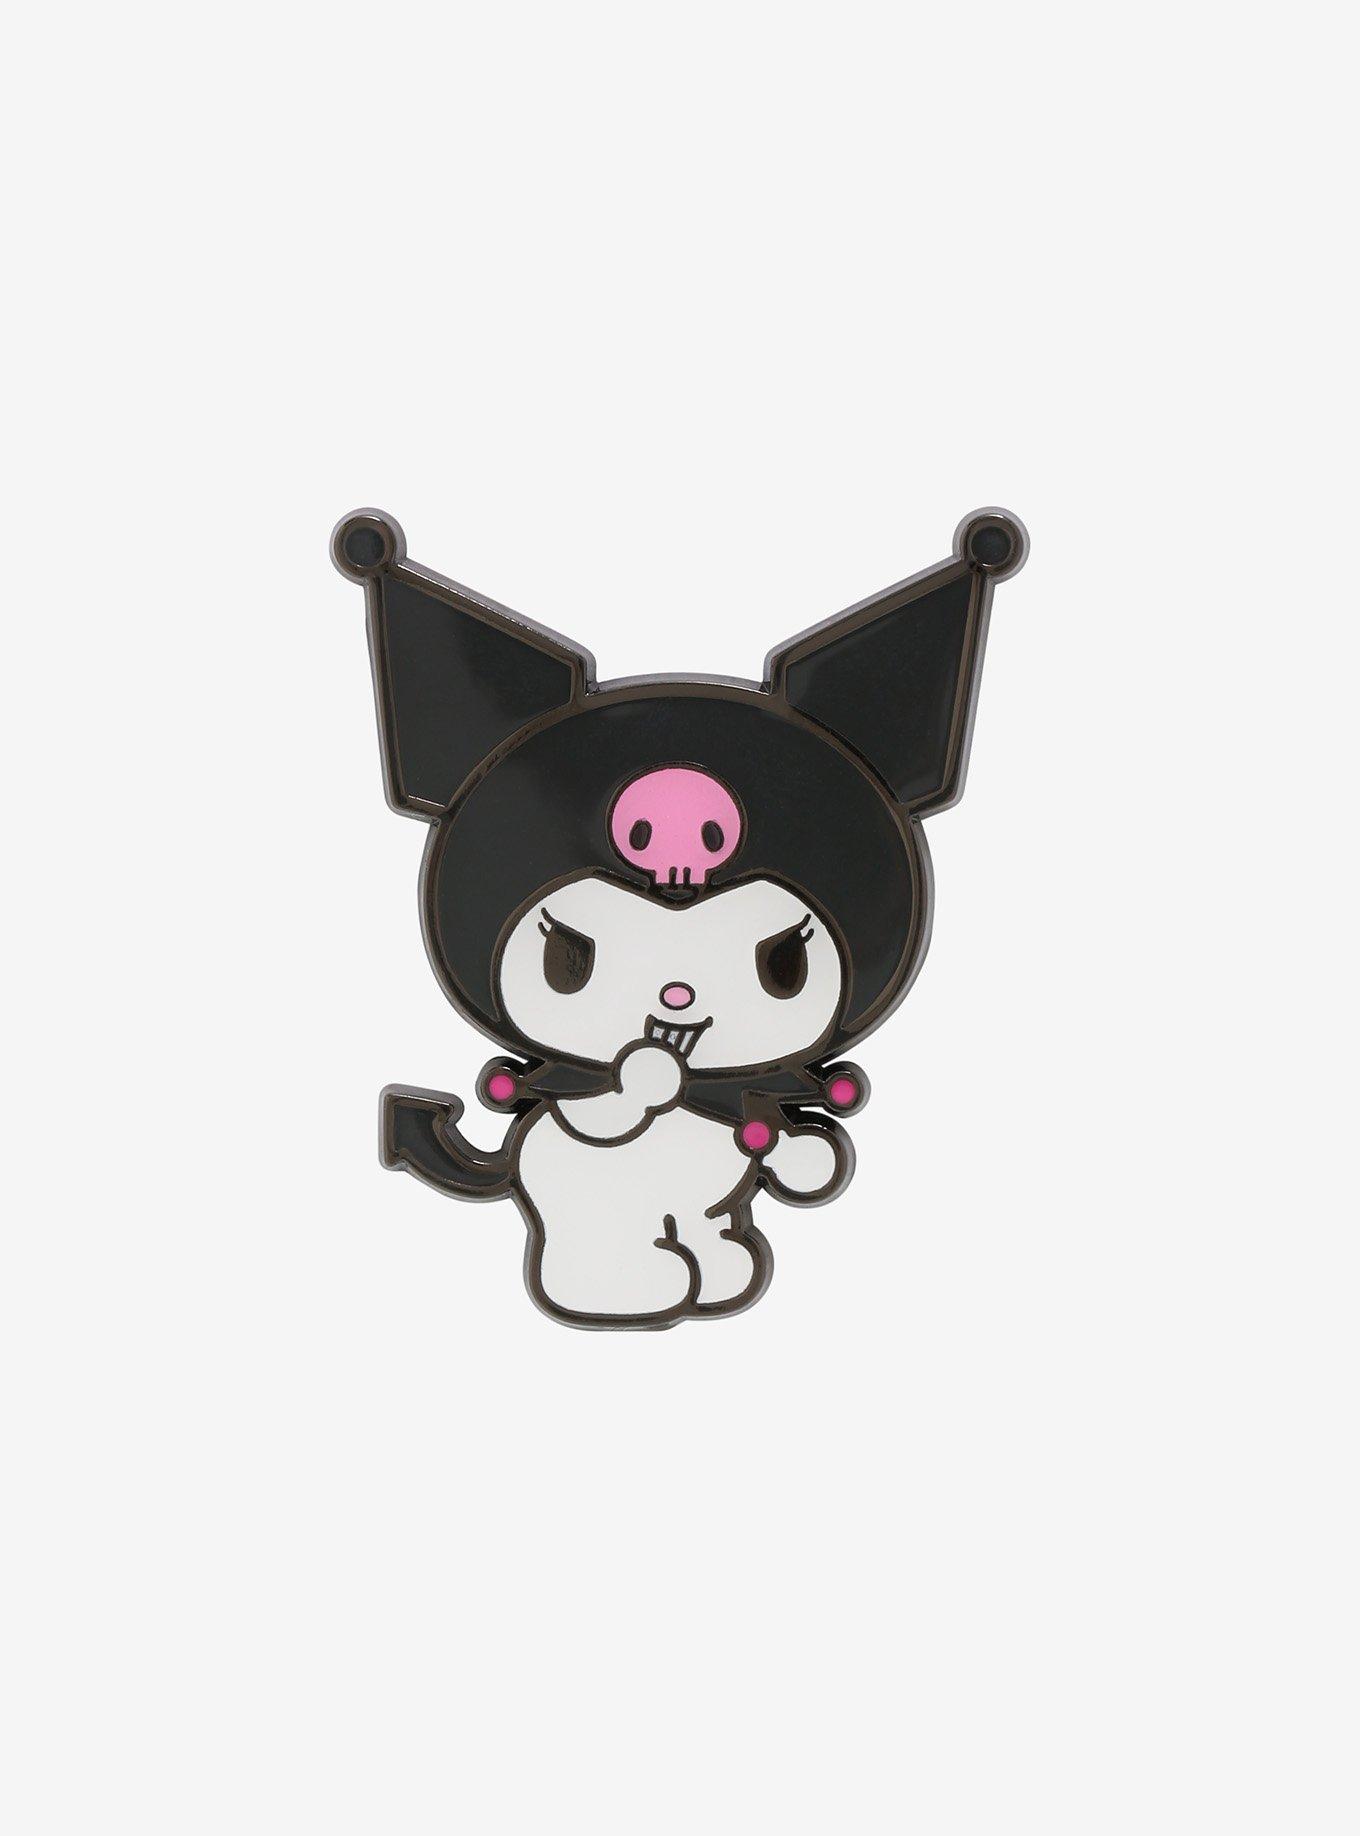 Sanrio Badges Kuromi Hello Kitty My Melody Cute Personalized Badge Fashion  Pins Accessories for Cartoon Clothes Bag Metal